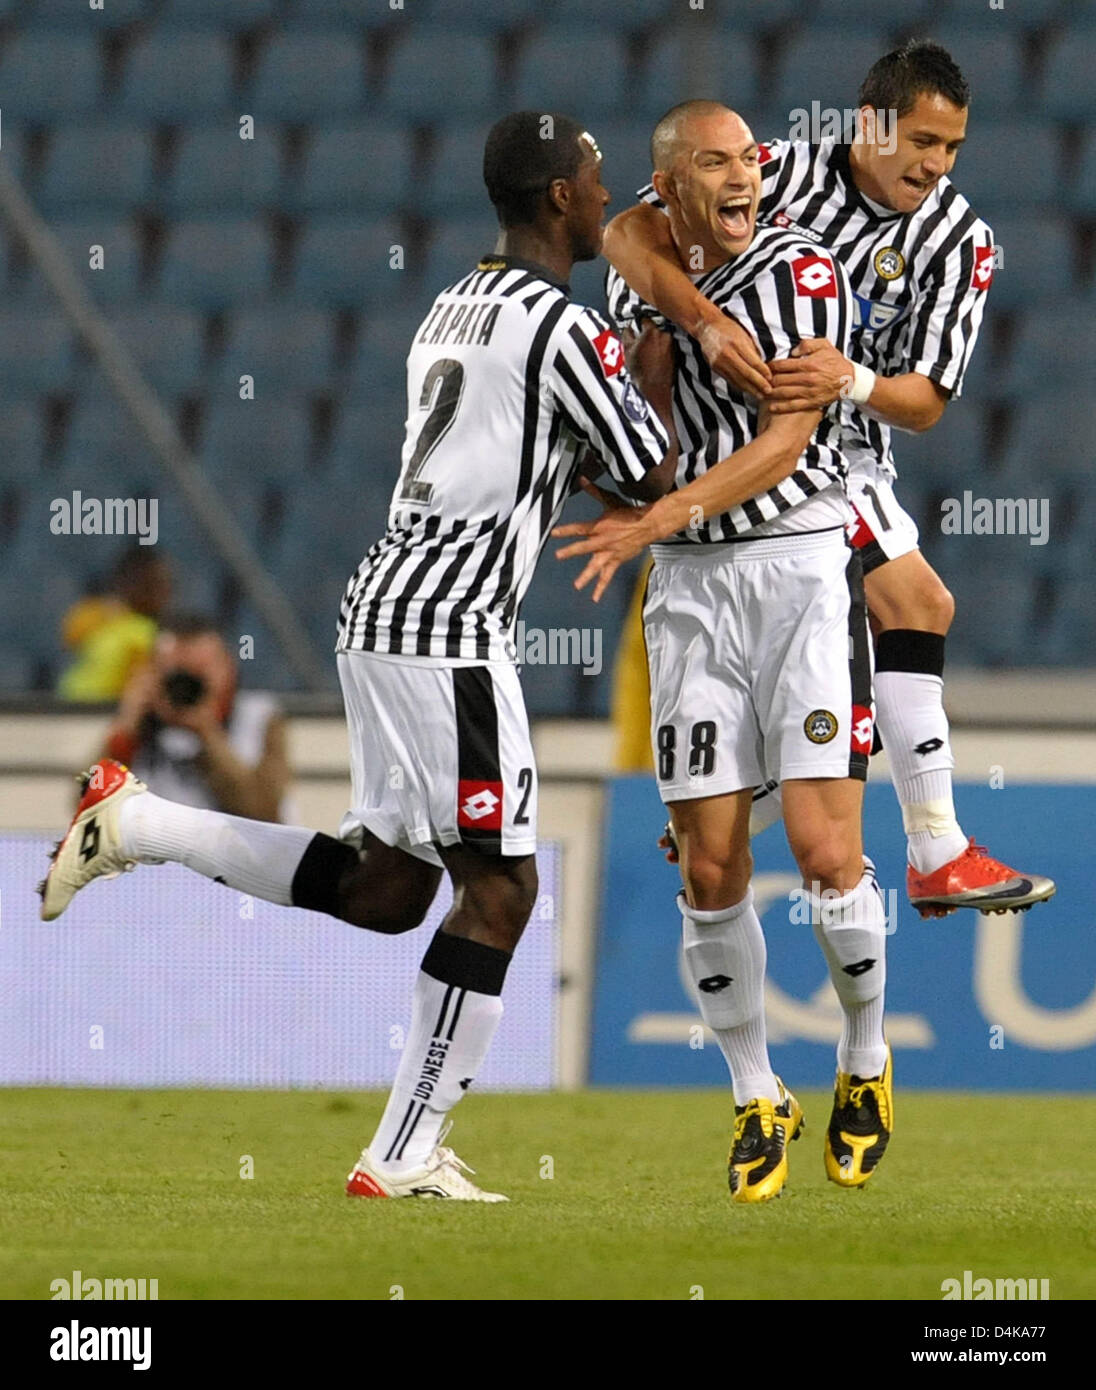 Udinese?s Cristian Zapata (L) and Alexis Sanchez (R) celebrate the scorer to 1-0, Goekhan Inler, during the UEFA Cup quarter finals second leg match Udinese vs Werder Bremen at Stadio Friuli in Udine, Italy, 16 April 2009. The match tied 3-3. Photo: Carmen Jaspersen Stock Photo